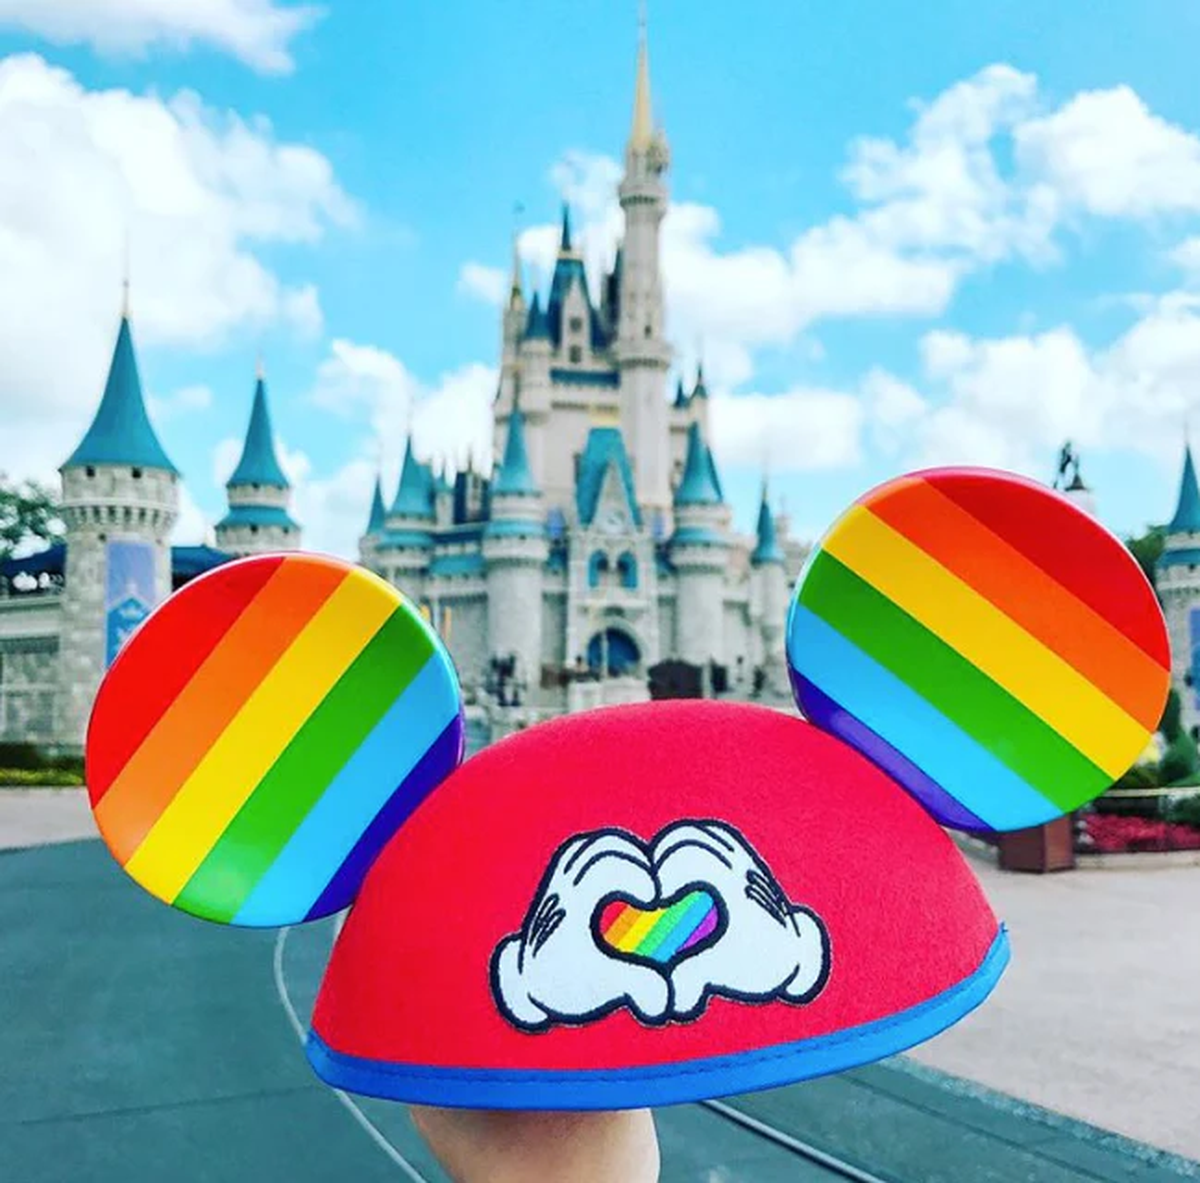 The Disney parks in Florida, for example, sell products in favor of the LGBTQ+ community in their stores.